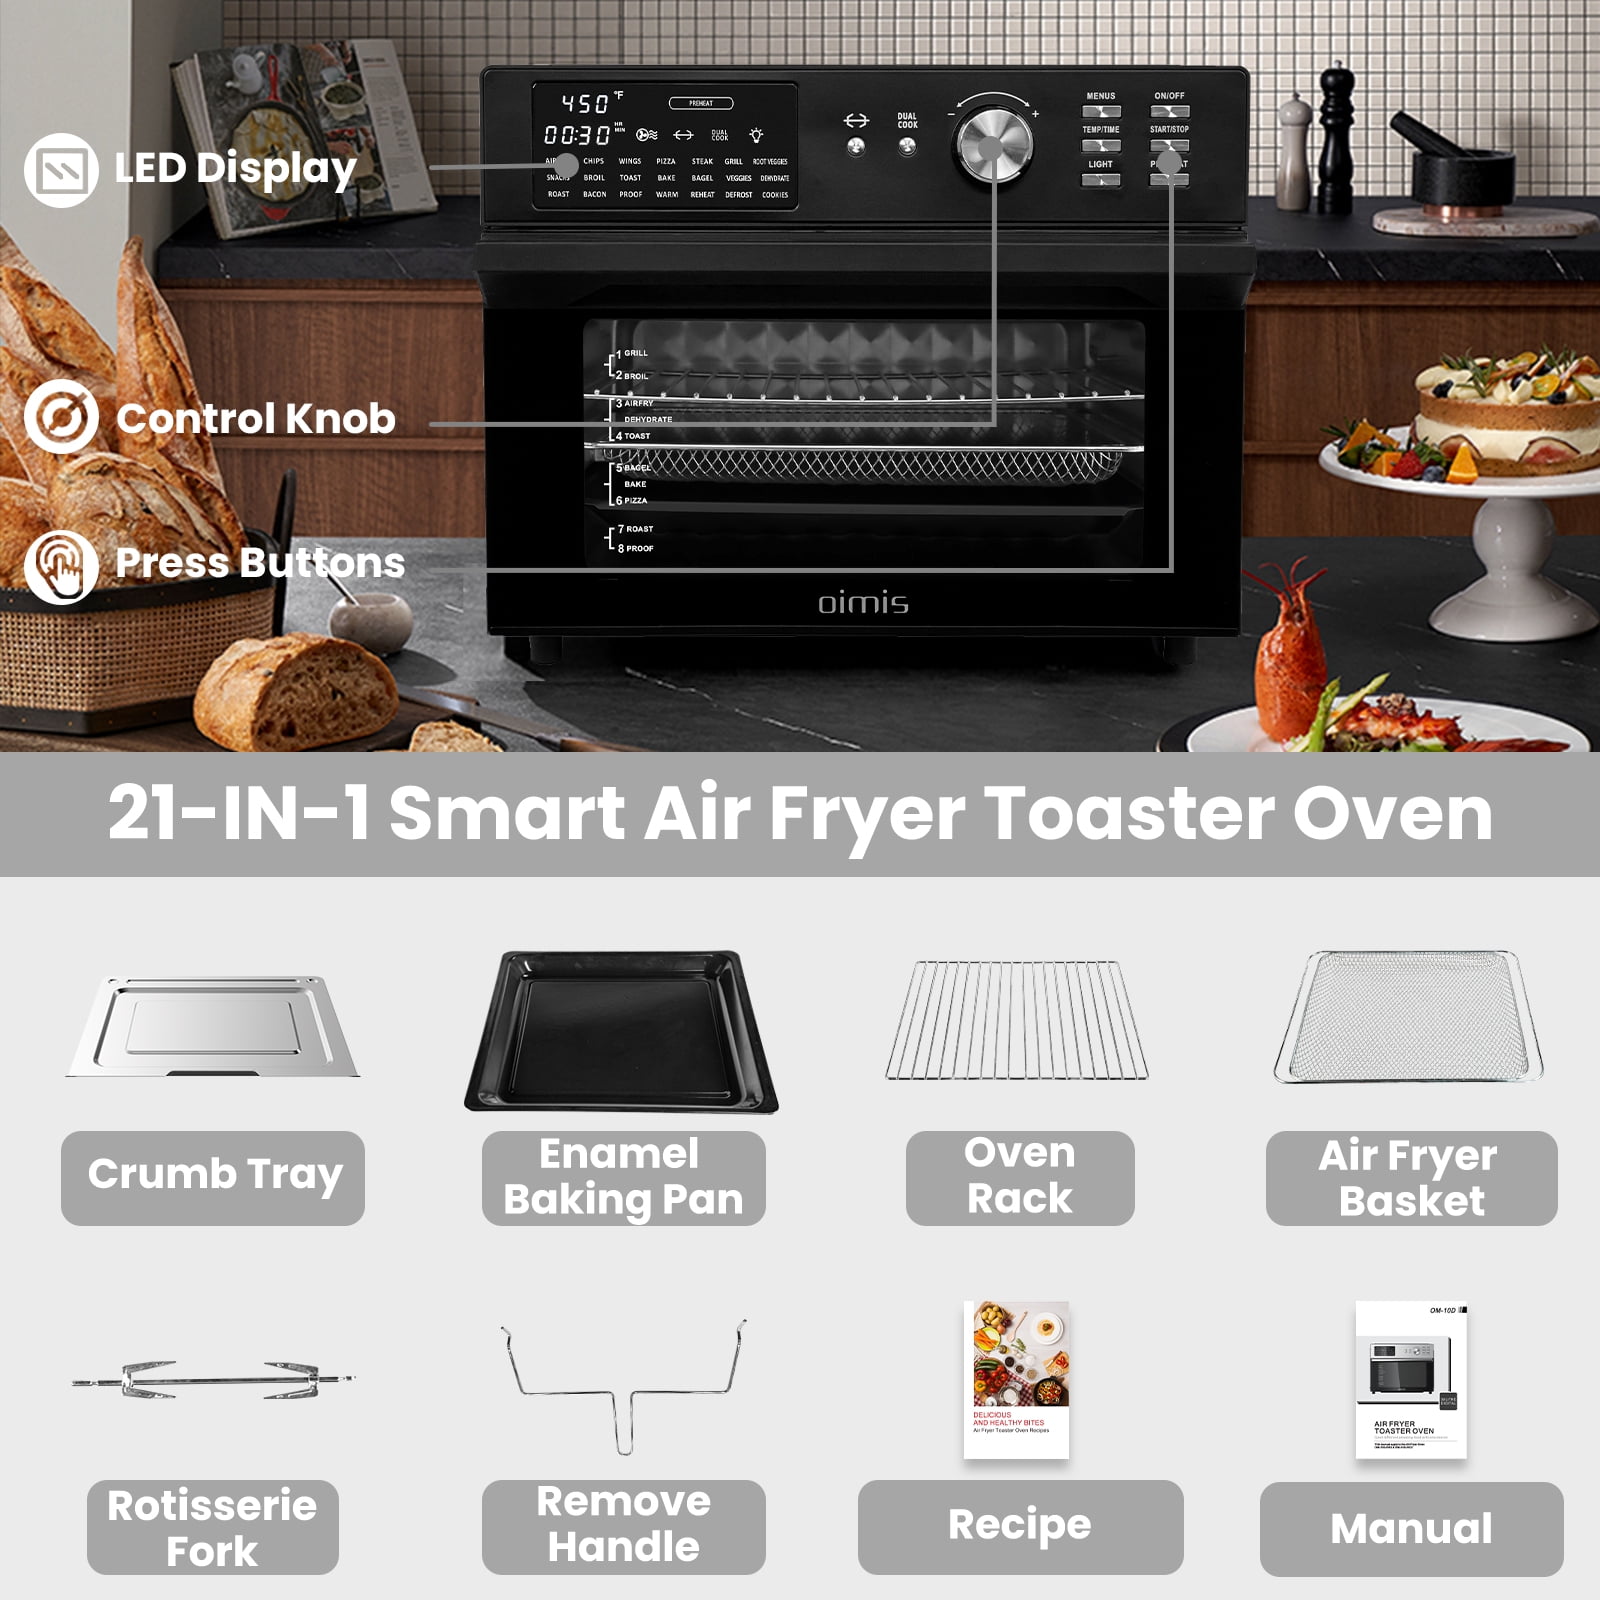 𝓞𝓘𝓜𝓘𝓢 Smart Large Air Fryer Toaster Ovens, 30L Extra Large 21